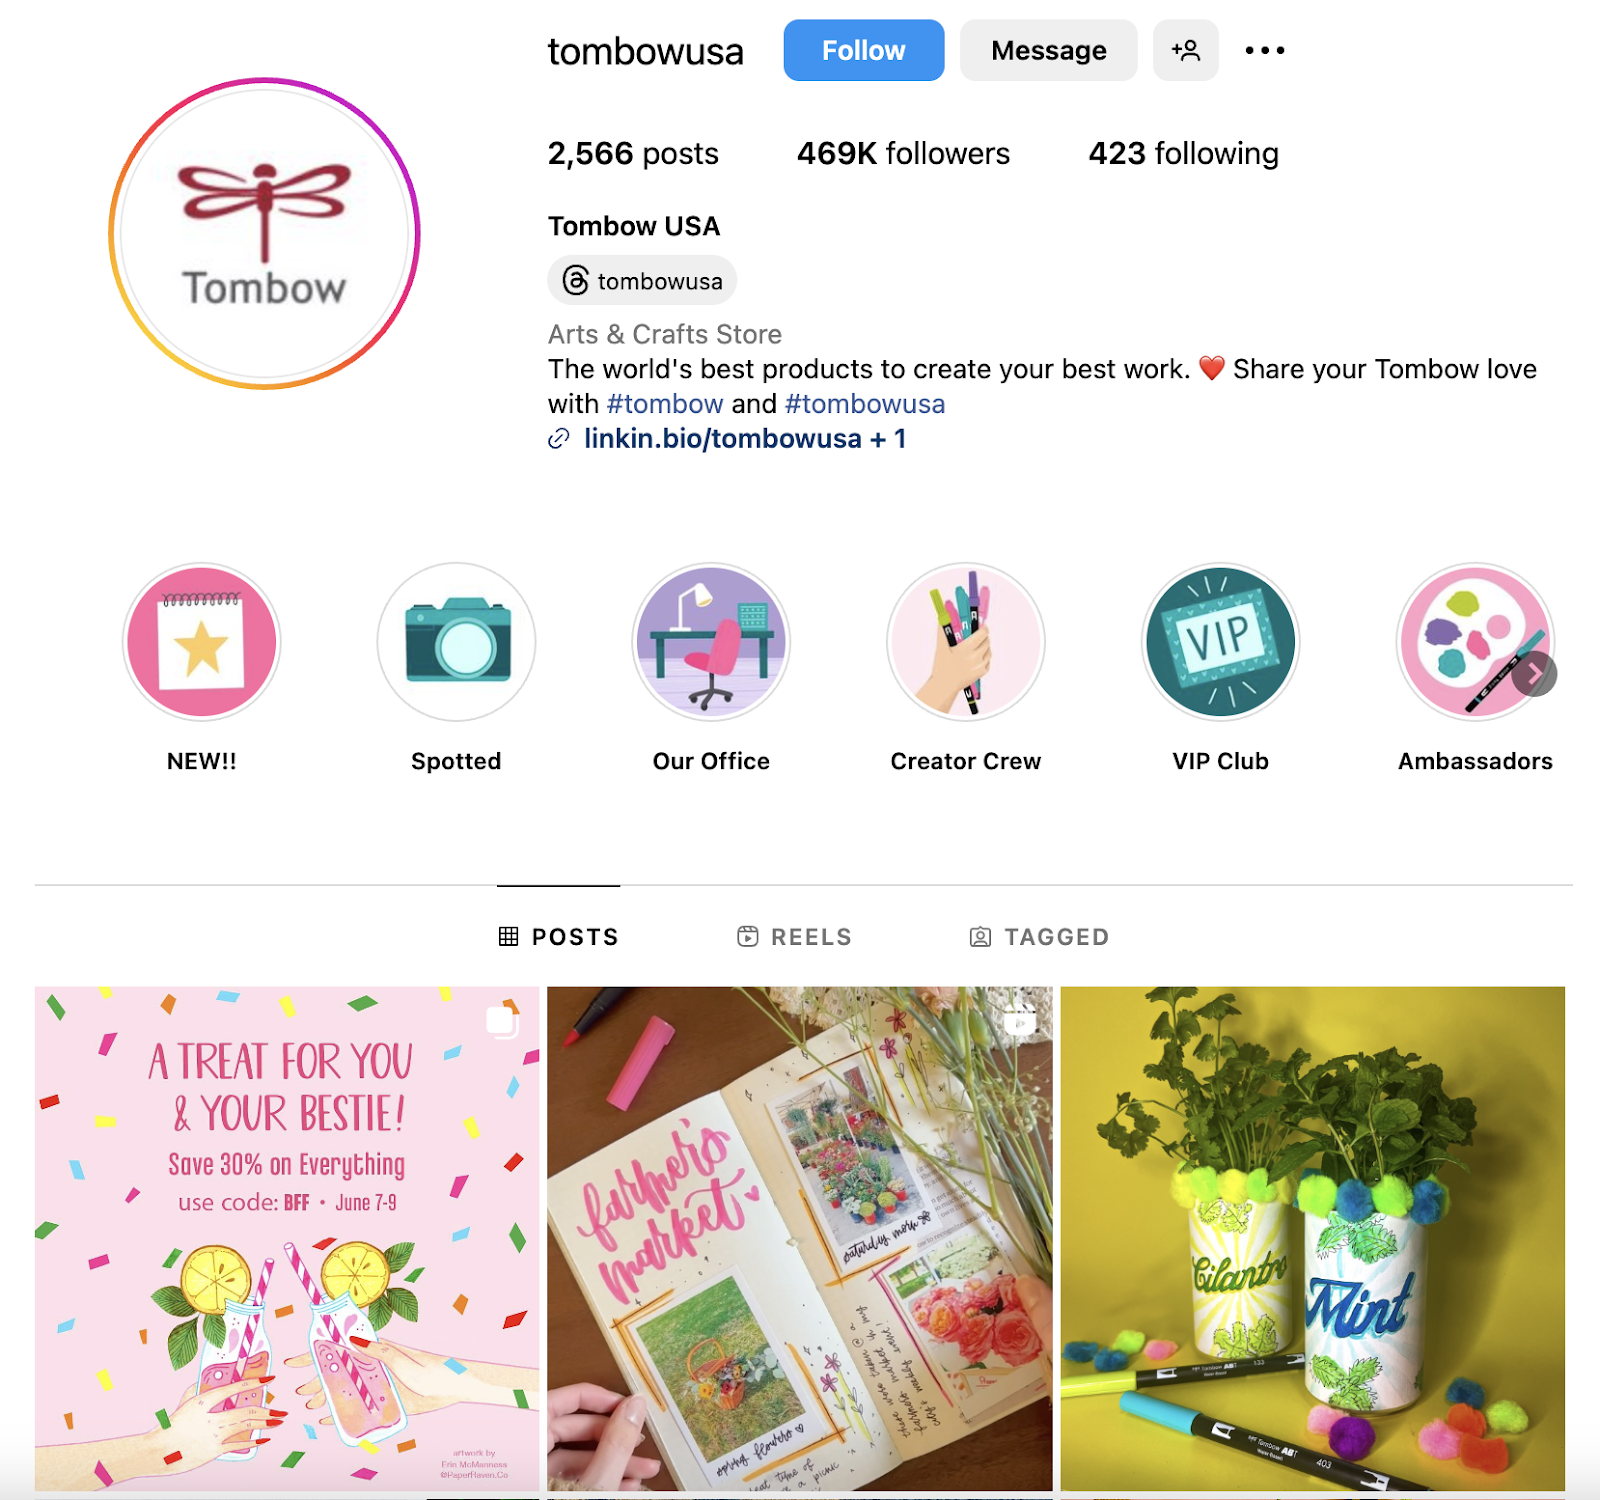 Tombow Instagram page with user generated content